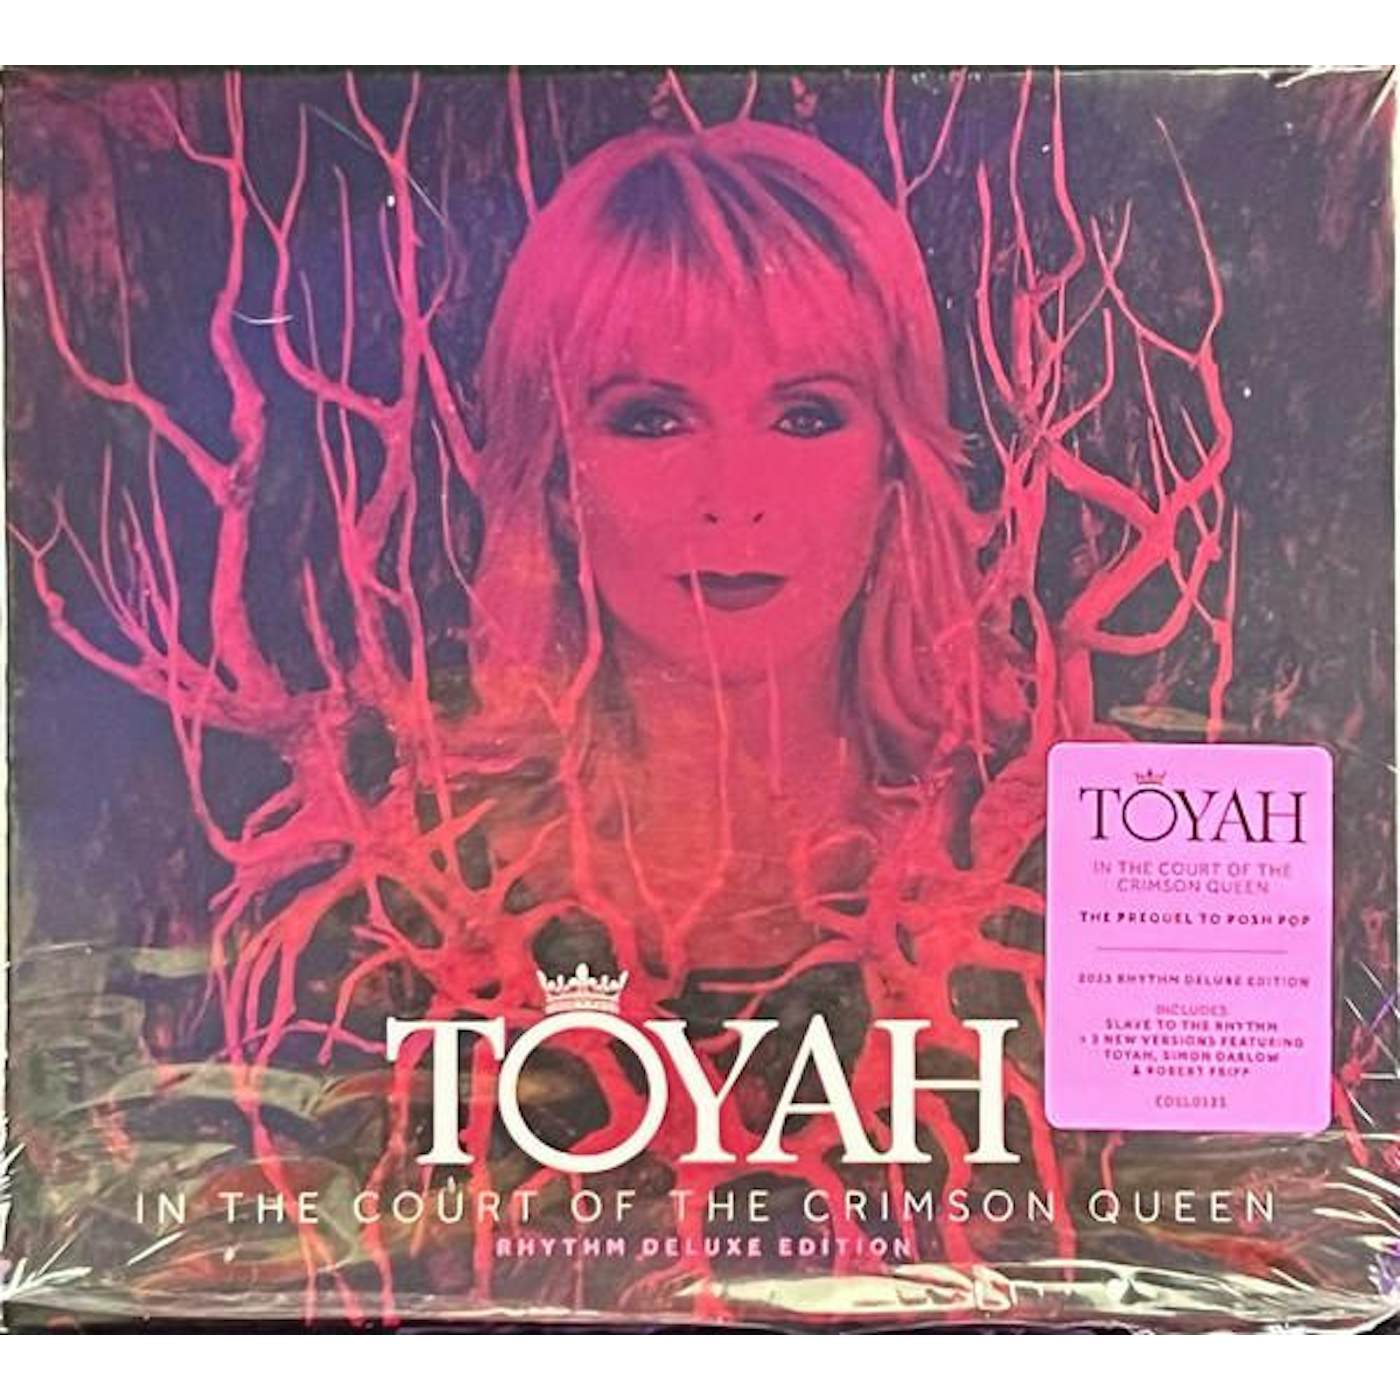 Toyah IN THE COURT OF THE CRIMSON QUEEN: RHYTHM (DELUXE EDITION) CD